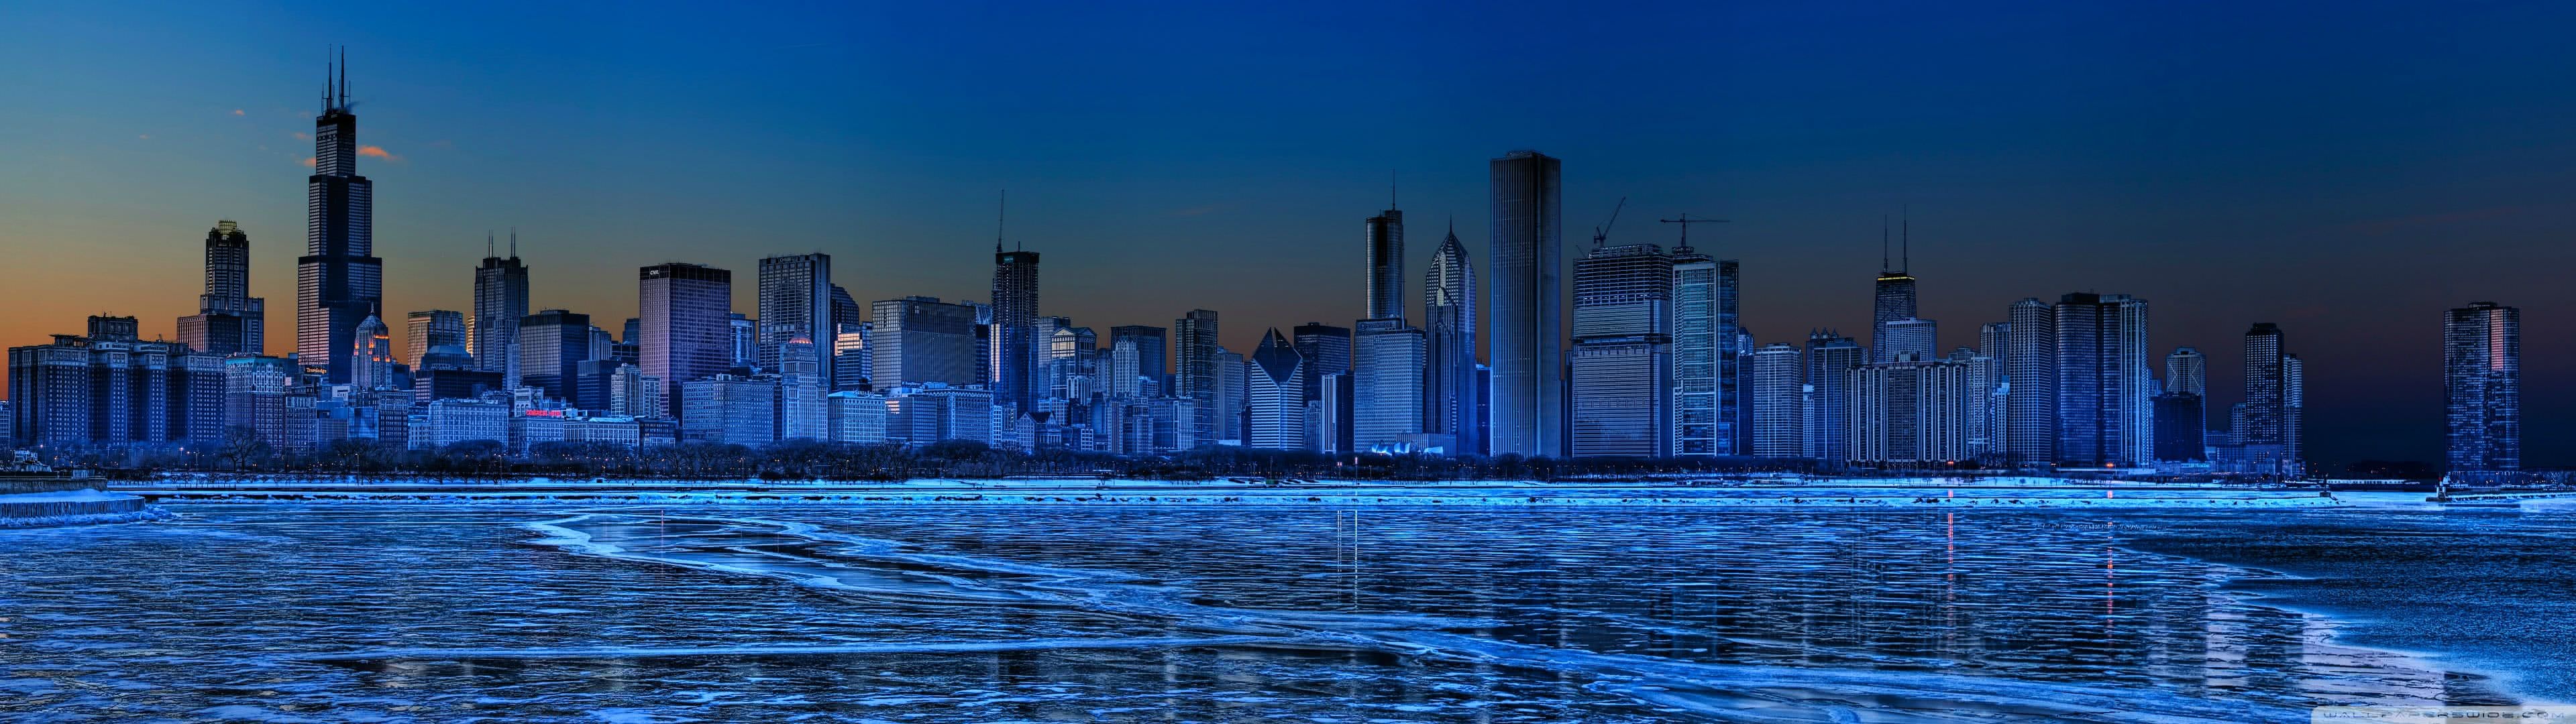 Chicago: The city has two major airports, O'Hare International Airport and Midway International Airport. 3840x1080 Dual Screen Wallpaper.